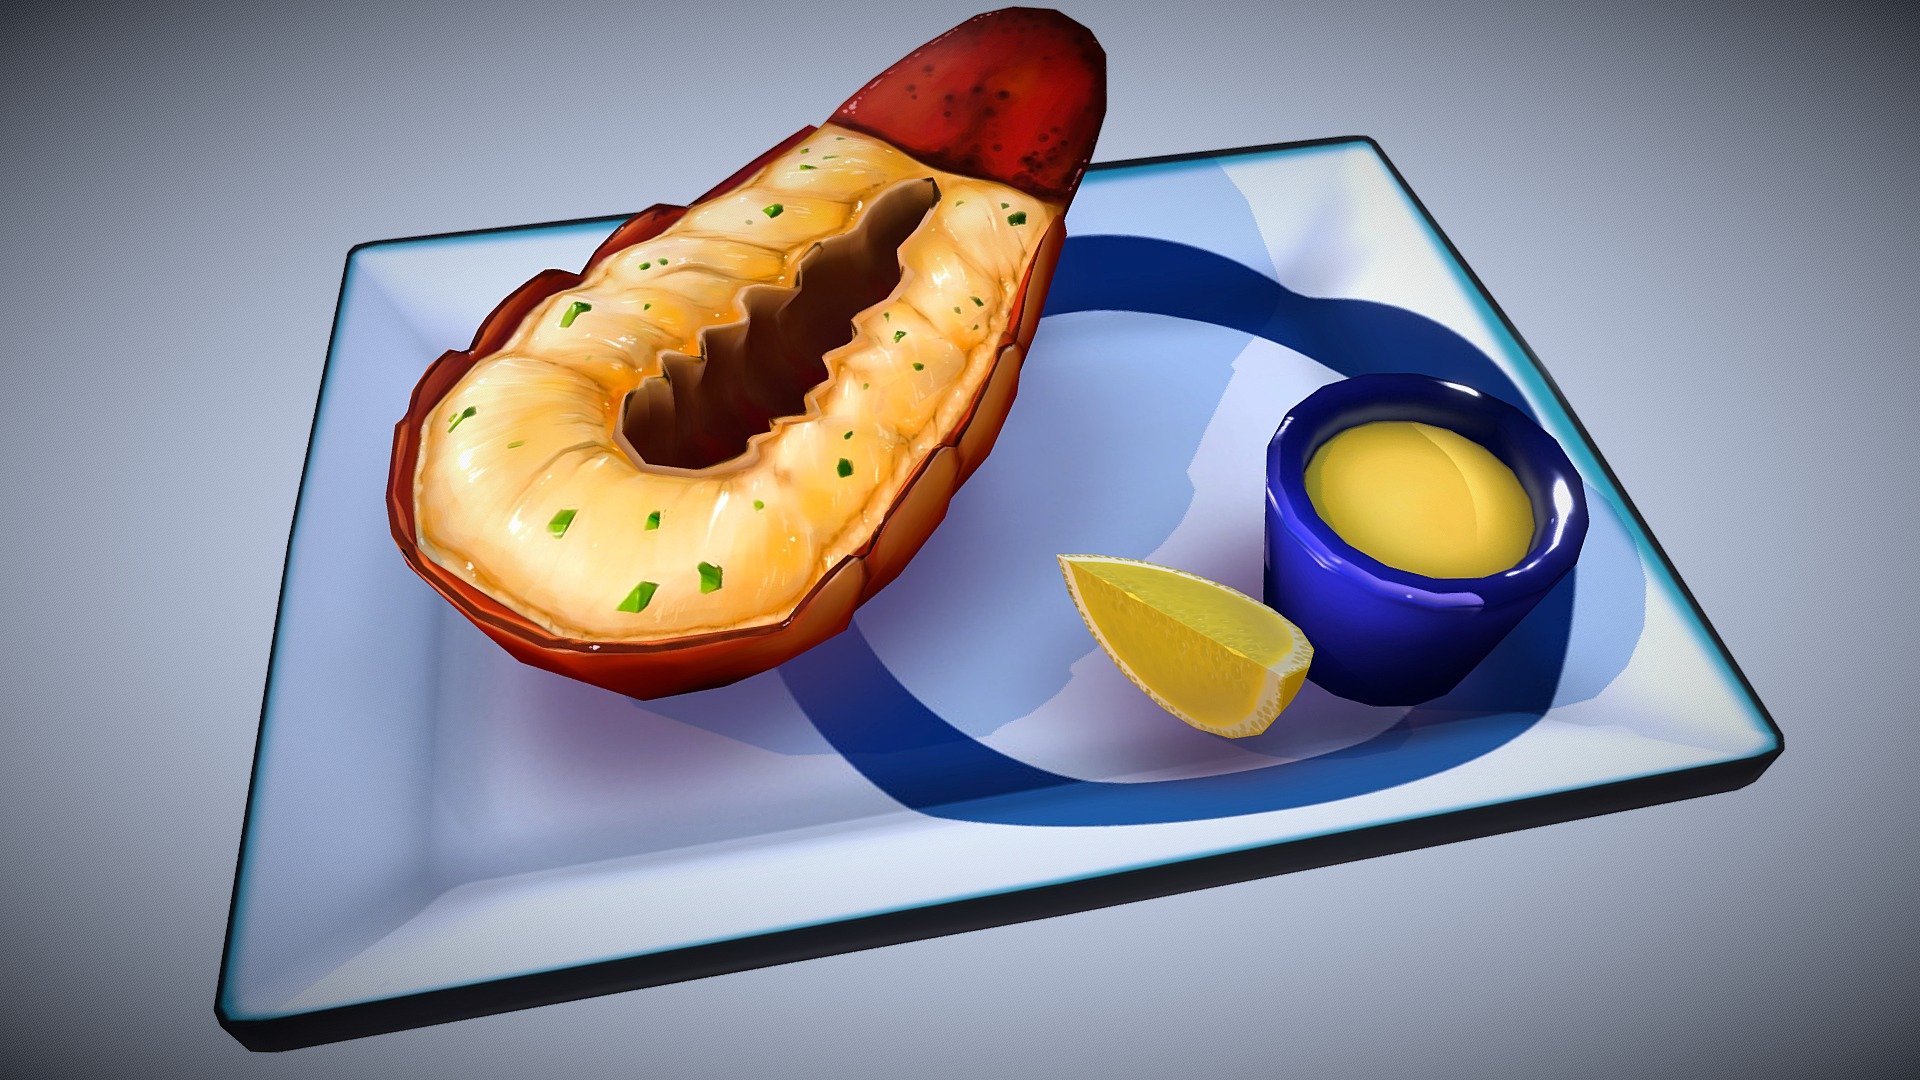 A hand painted texture lobster dish 3d model